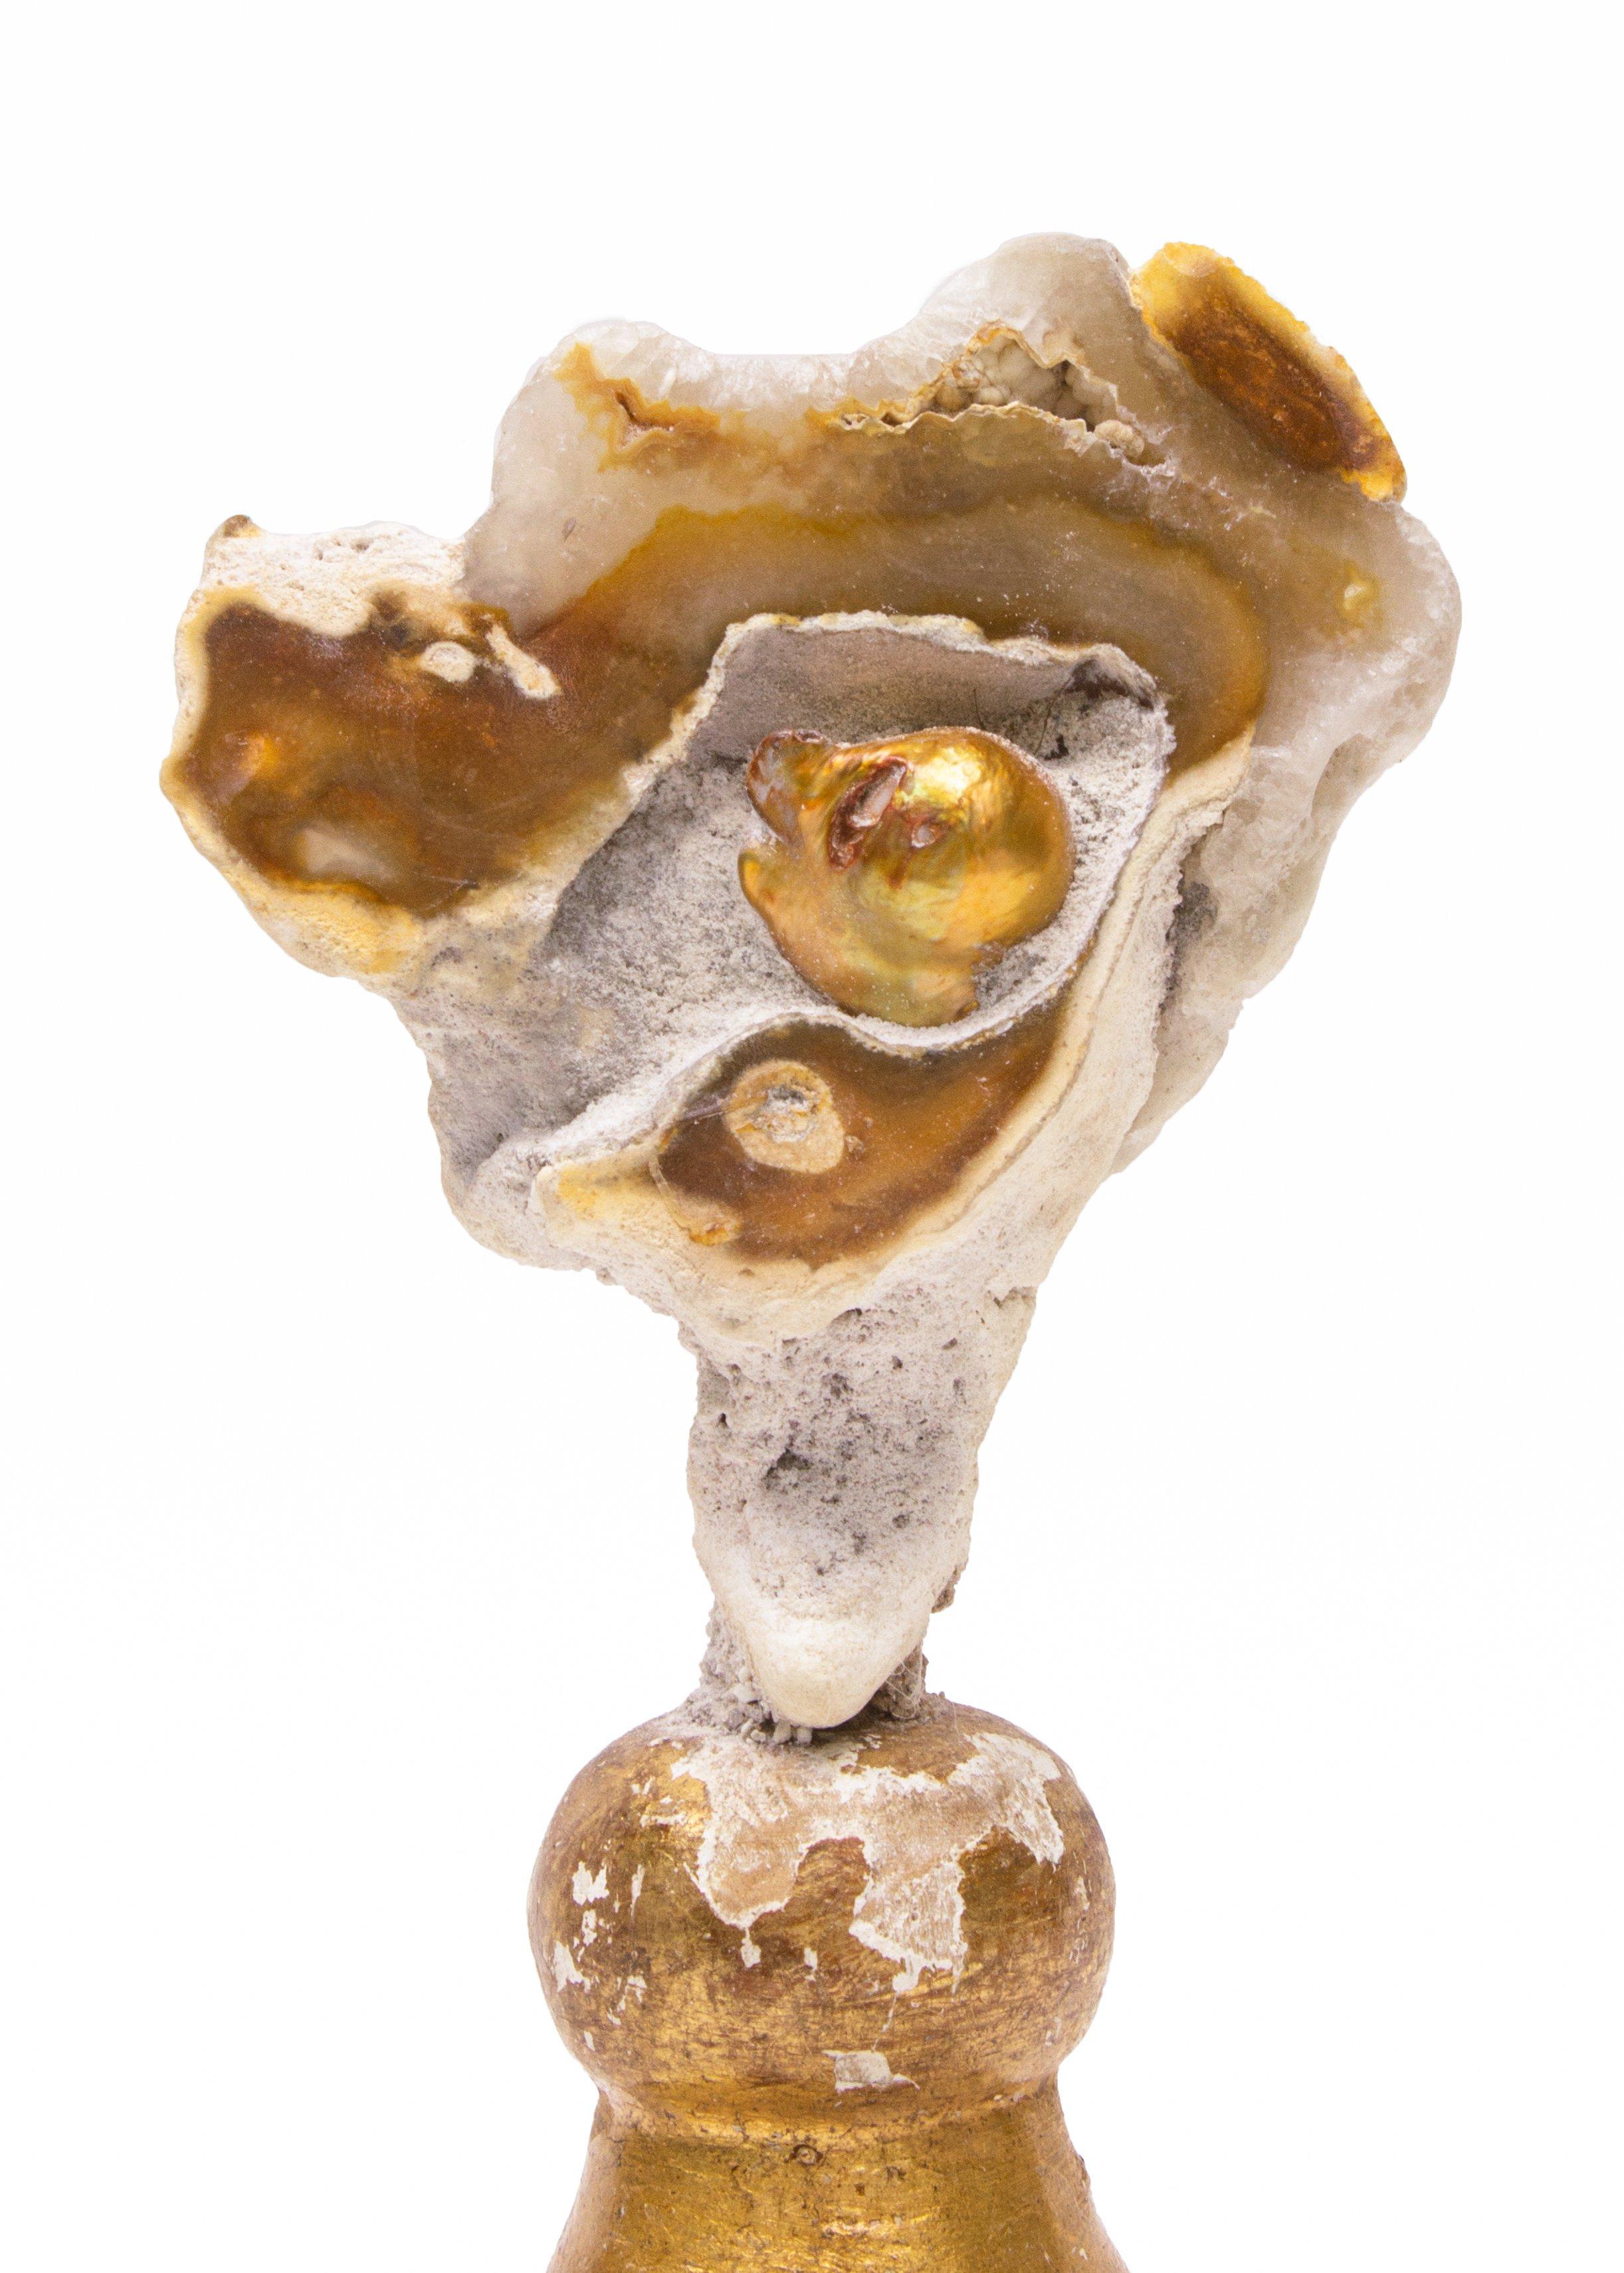 18th century Italian gold leaf candlestick top with polished fossil agate coral and a natural forming baroque pearl. The 18th century fragment comes from Tuscany and has the original candlestick wax drip-tray attached.

Fossil agate coral is also